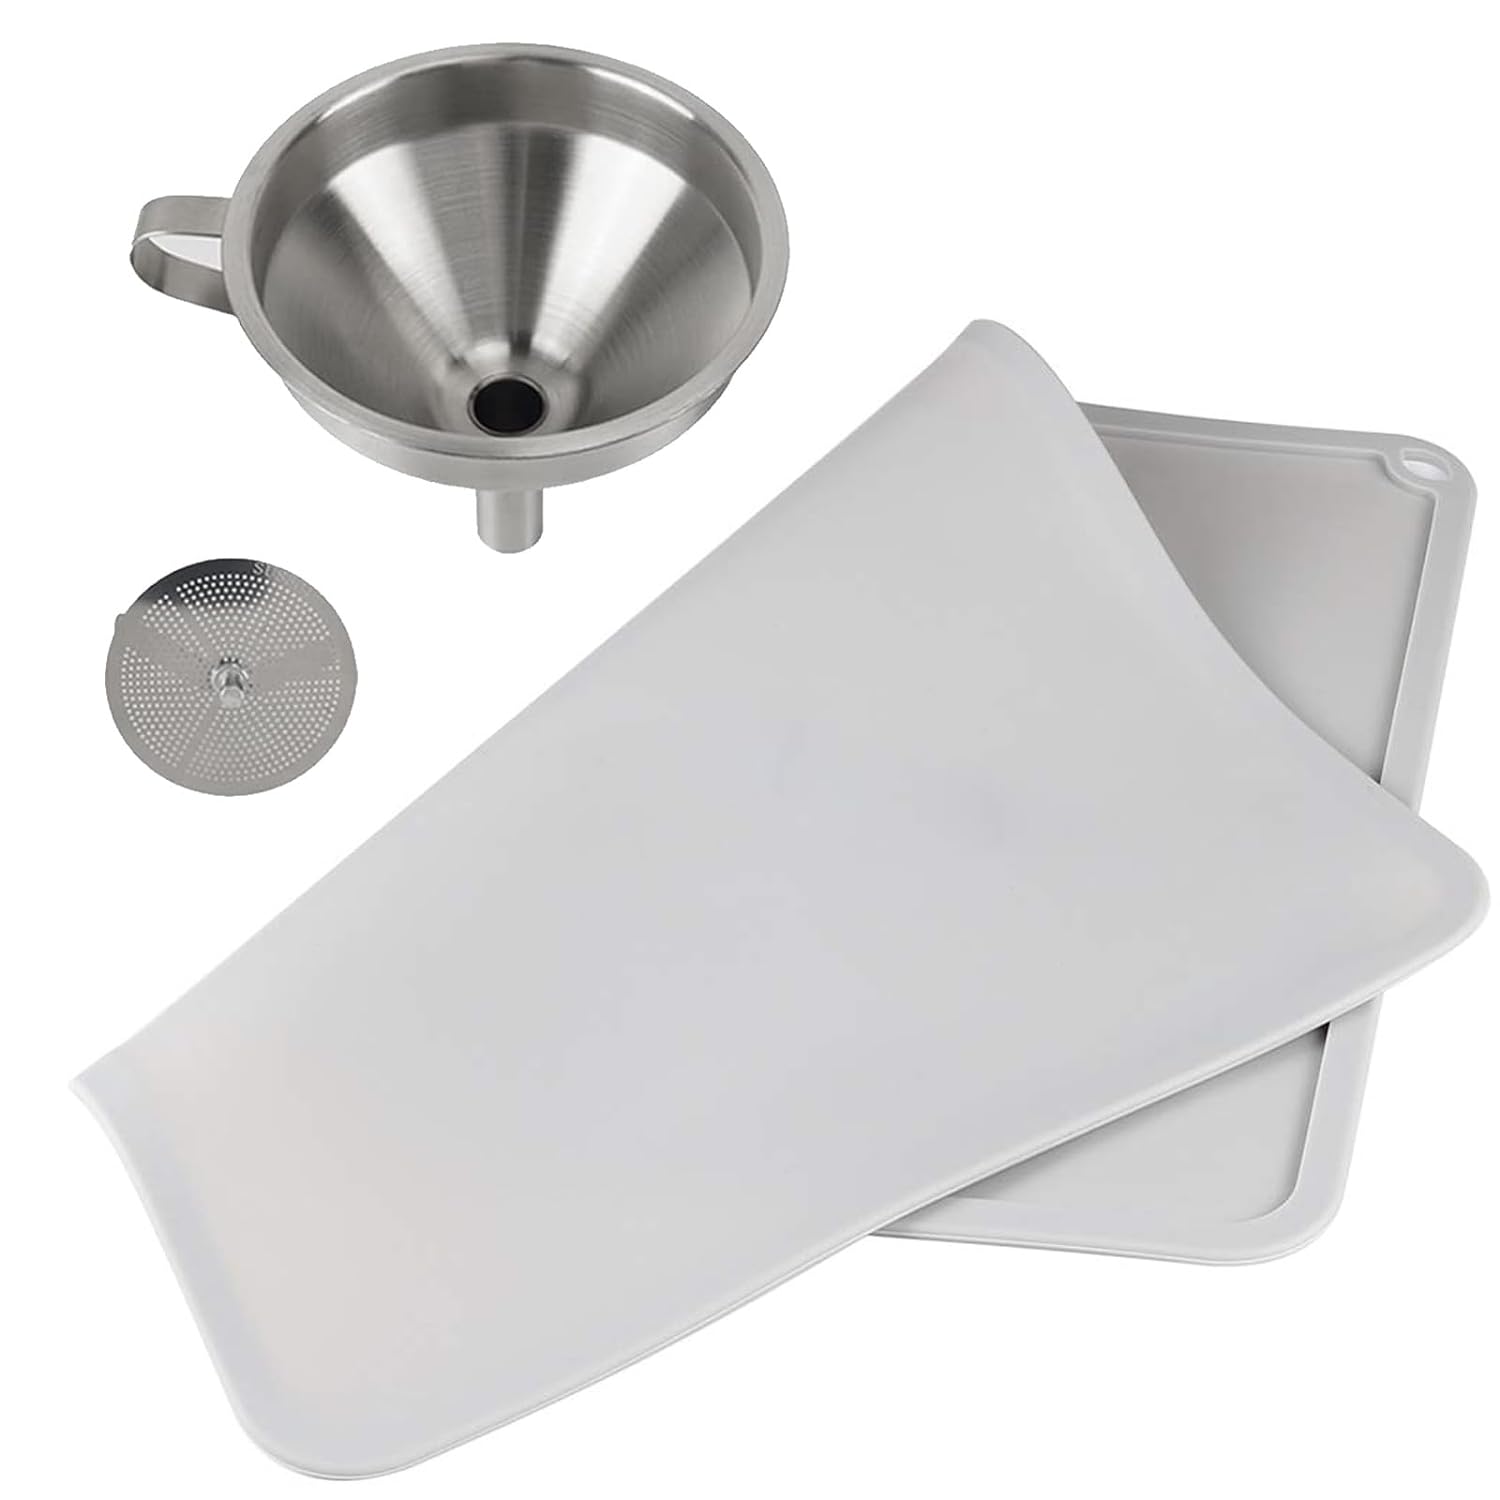 yoopai-funnel-and-mat-stainless-steel-filter-funnel-silicone-slap-mat-cleaning-kit-for-filtering-resin-and-recover-liqui YOOPAI Funnel and Mat Review